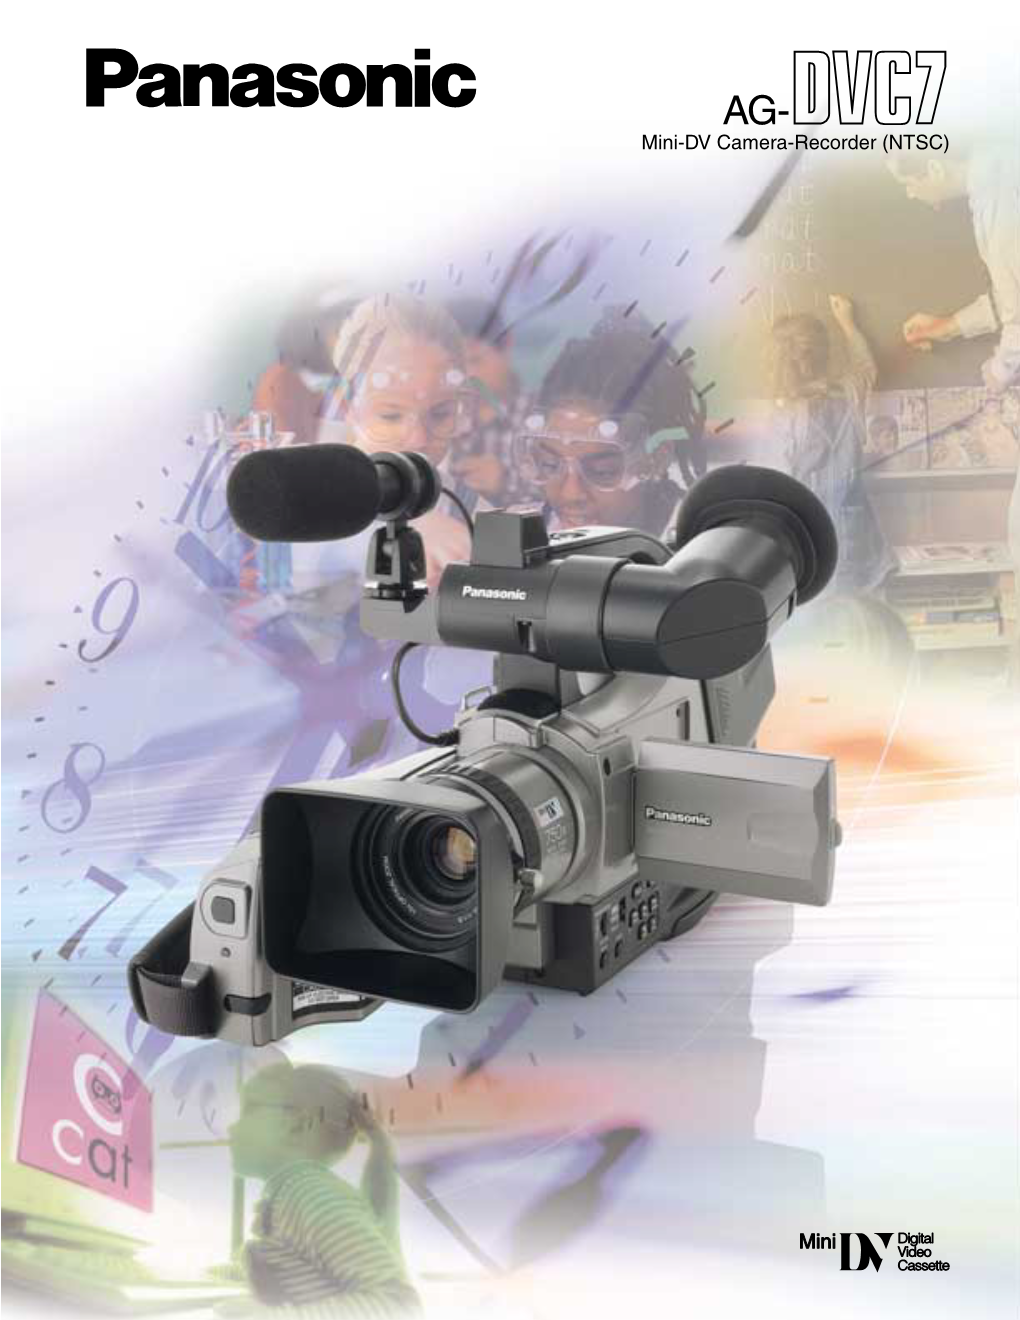 Mini-DV Camera-Recorder (NTSC) the AG-DVC7 Makes It Easy for Anybody to Produce Professional-Looking Digital Videos